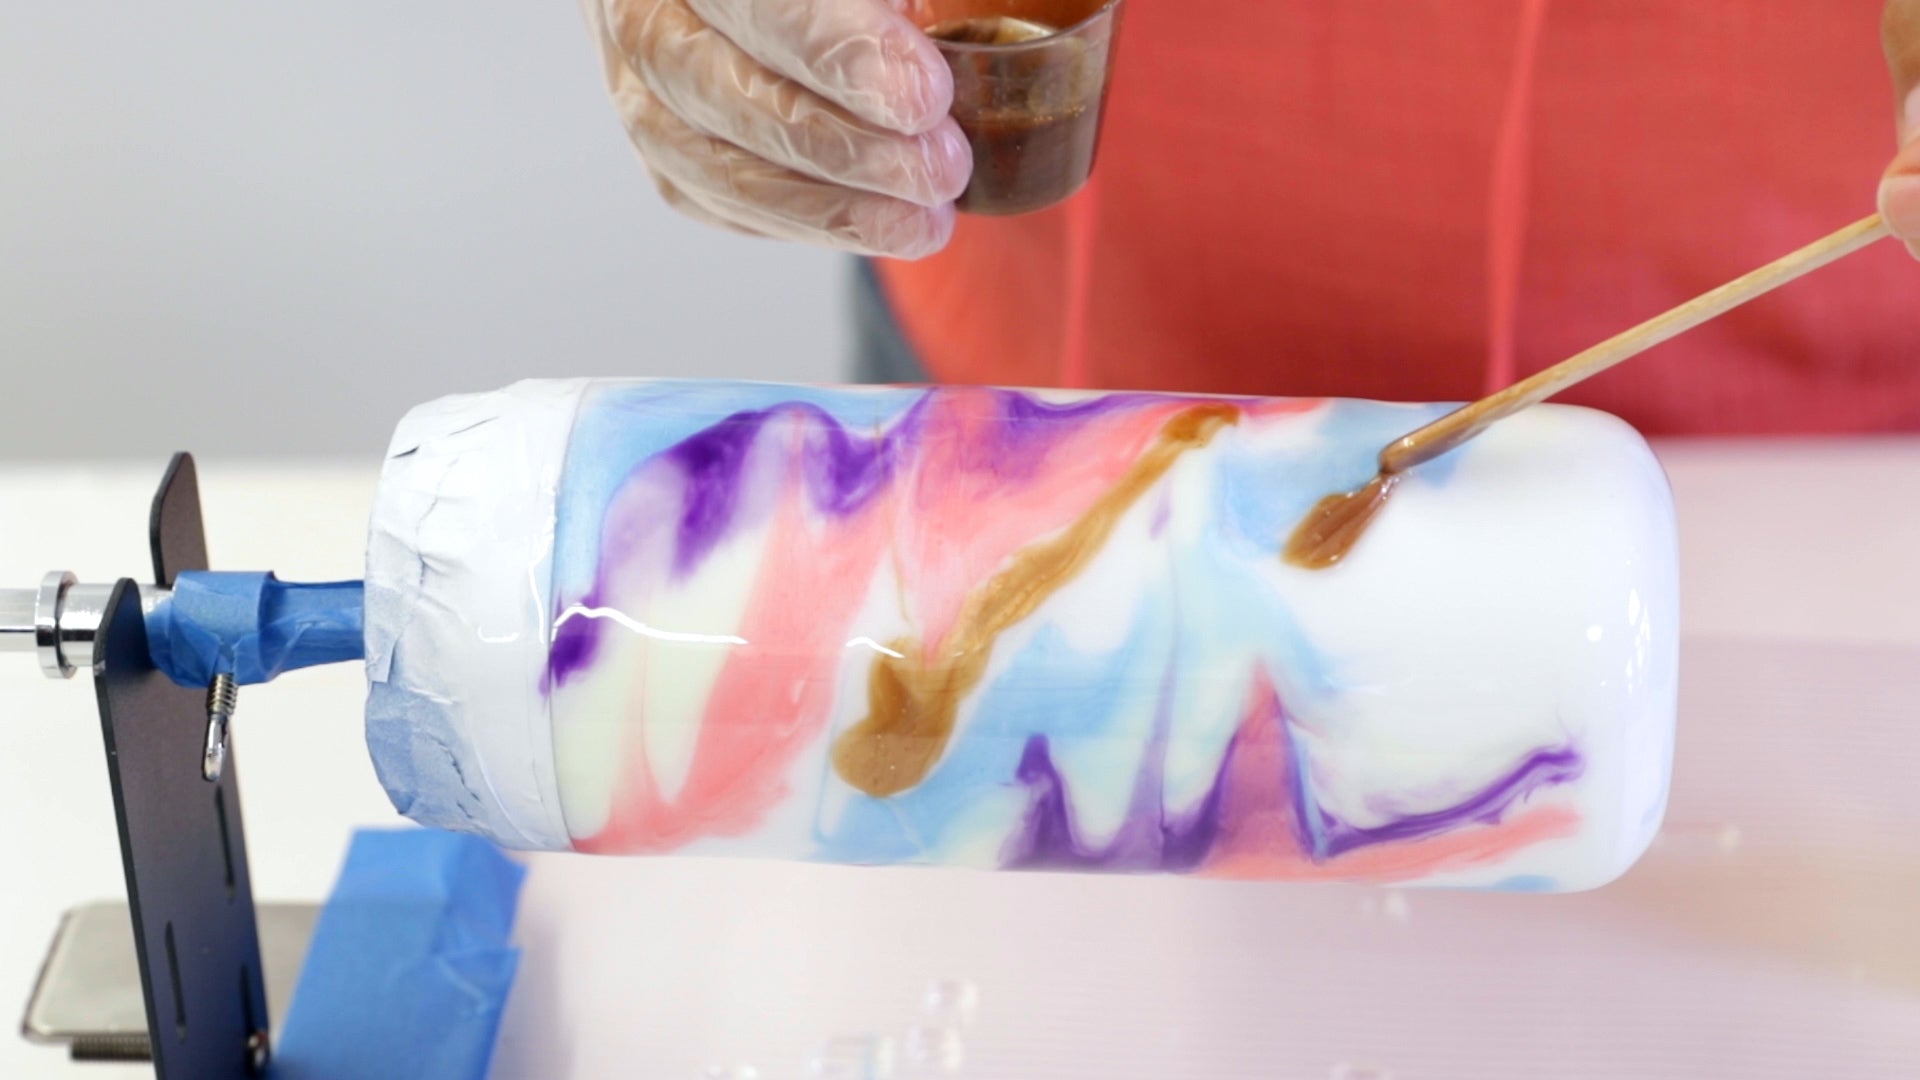 Make A Resin Tumbler - clear resin will help the tinted resin to blend